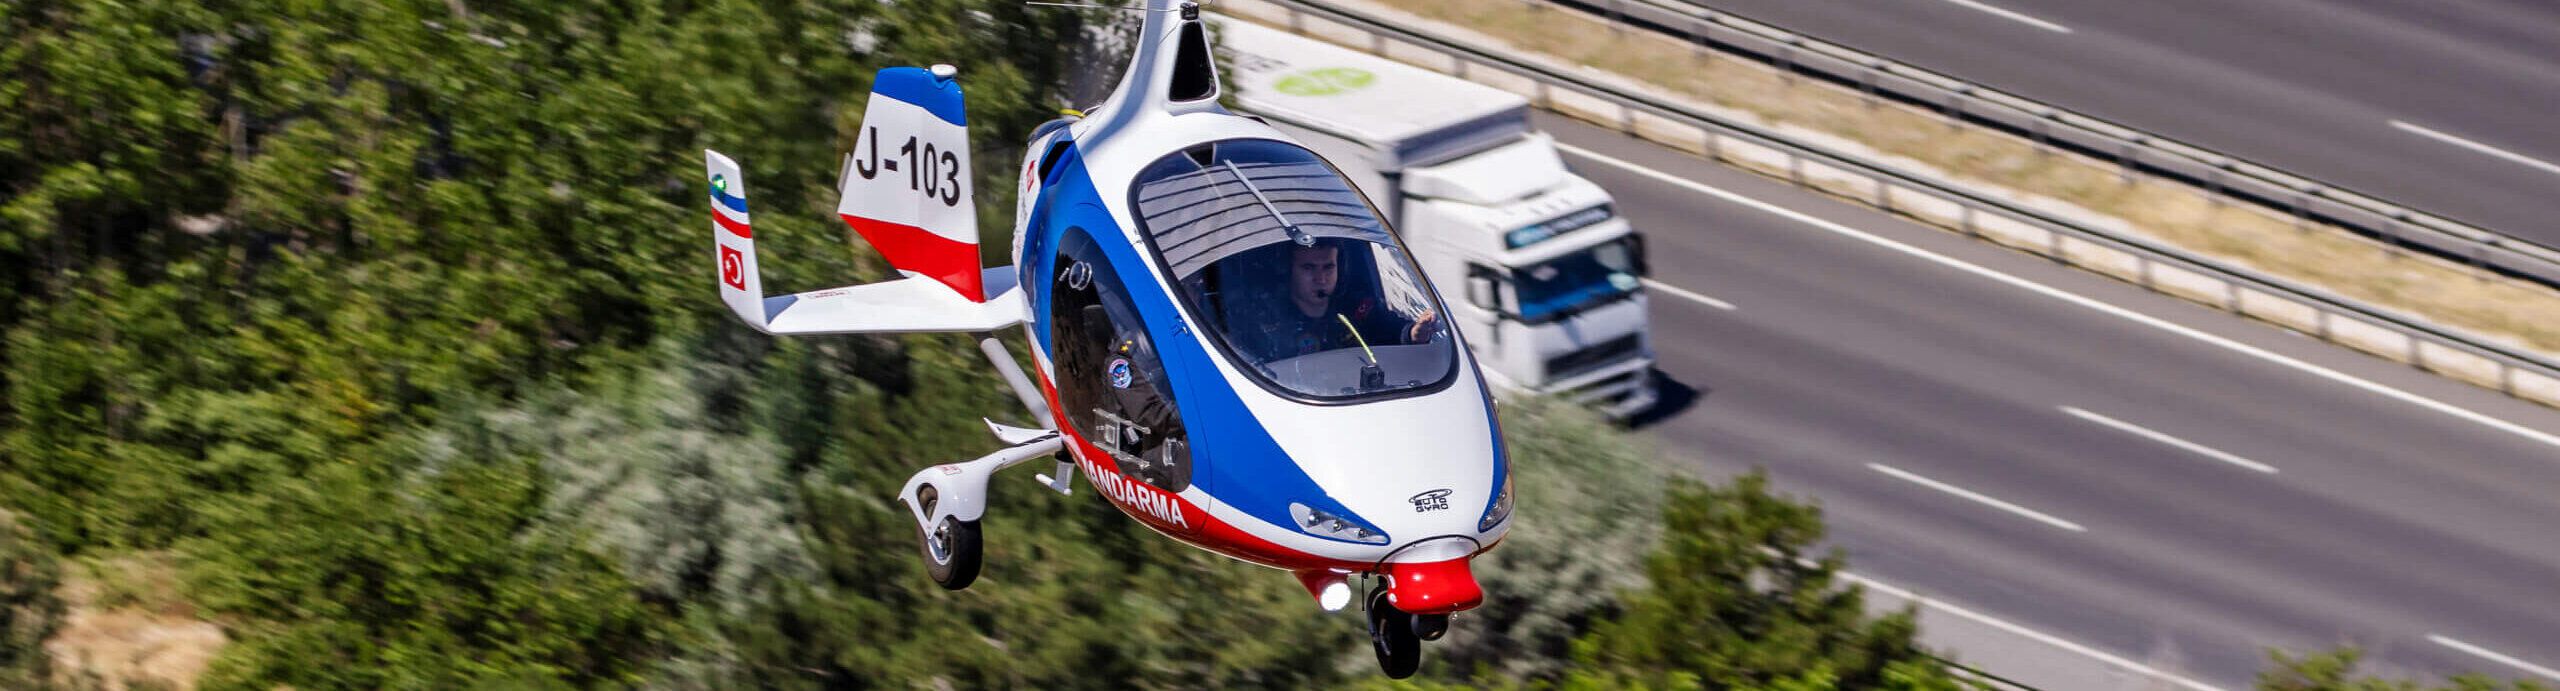 AutoGyro gyroplane Cavalon Sentinel flying over the highway for search and rescue